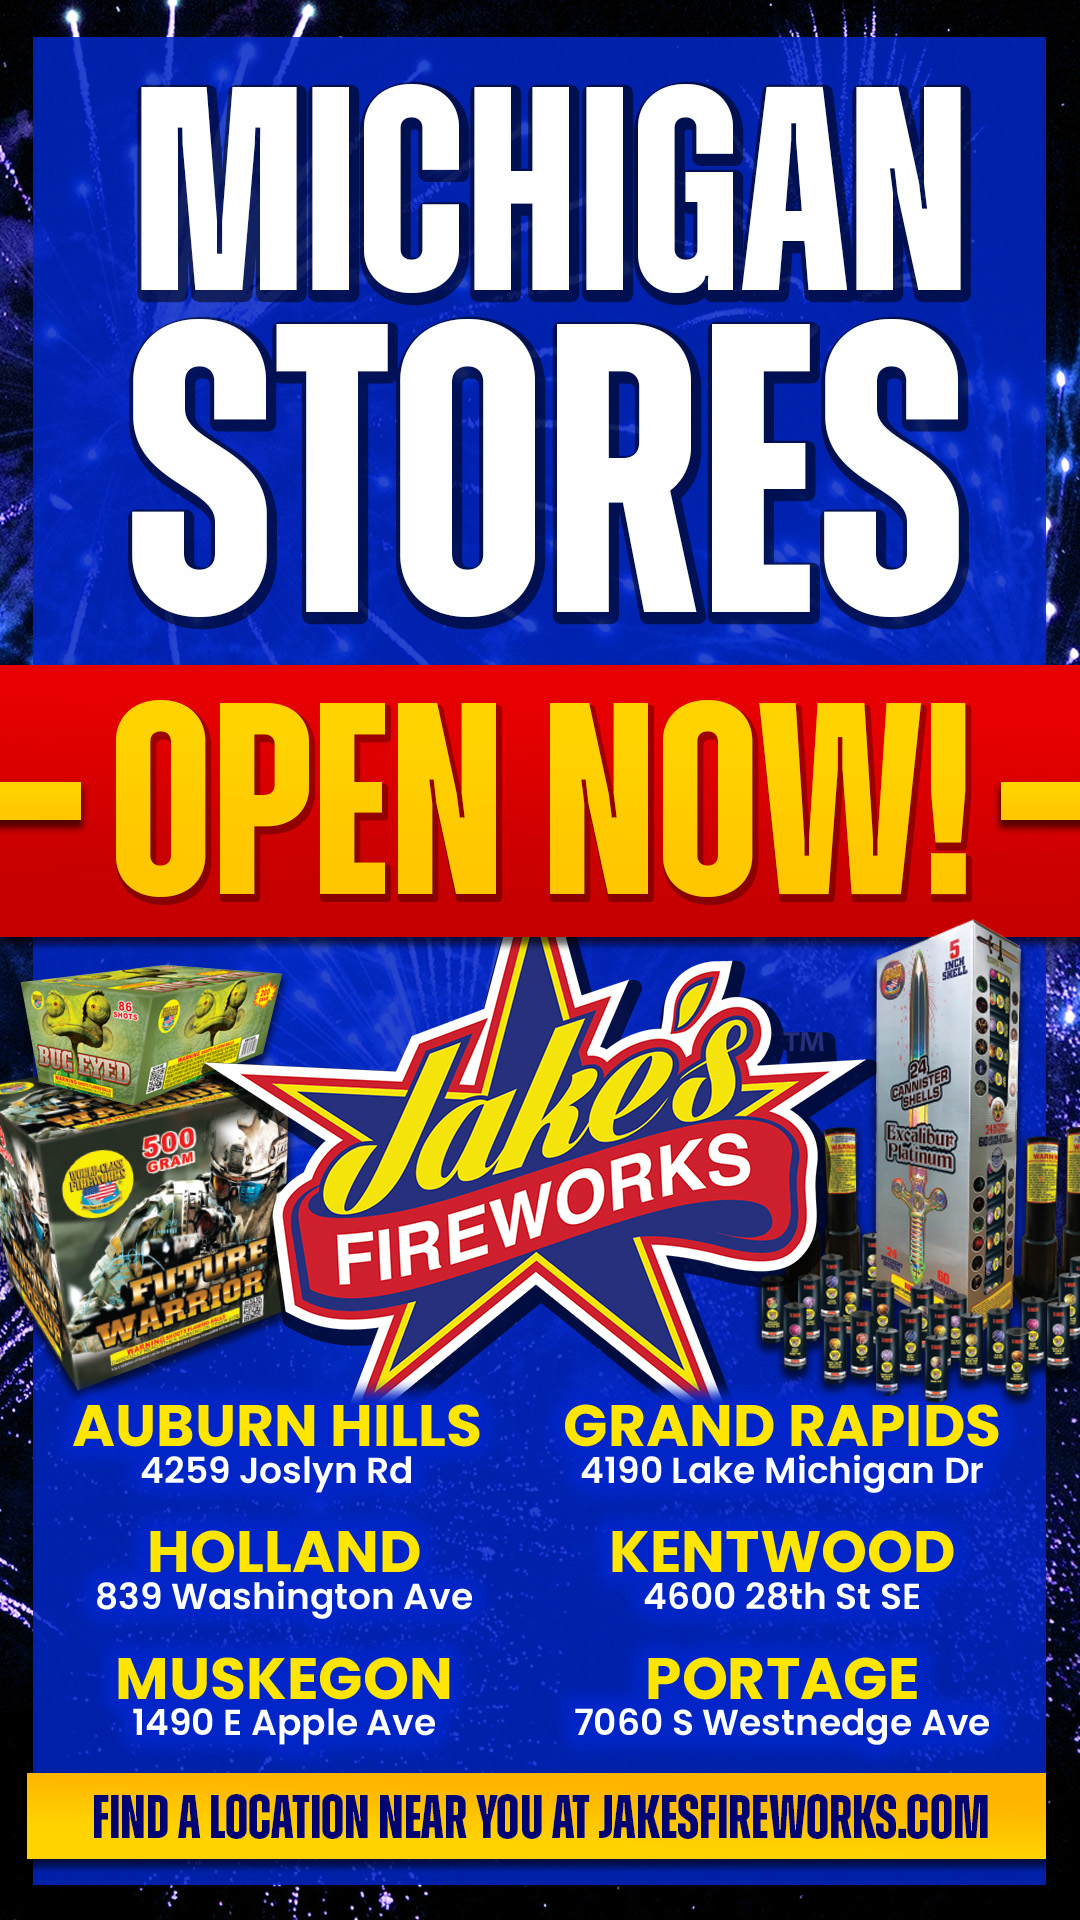 Michigan Stores Now OPEN - Special Coupon Offer